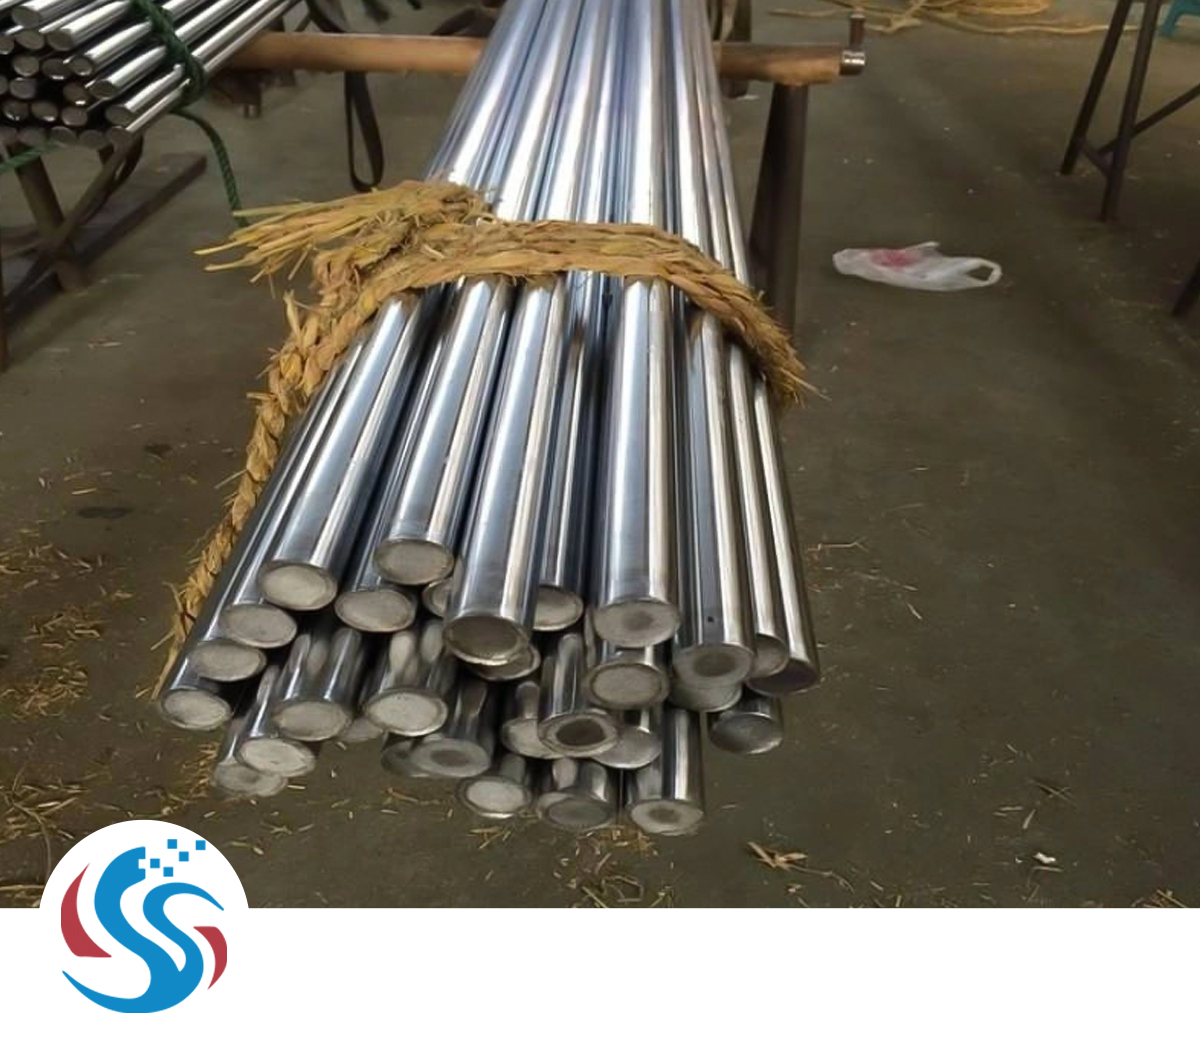 stainless steel bar